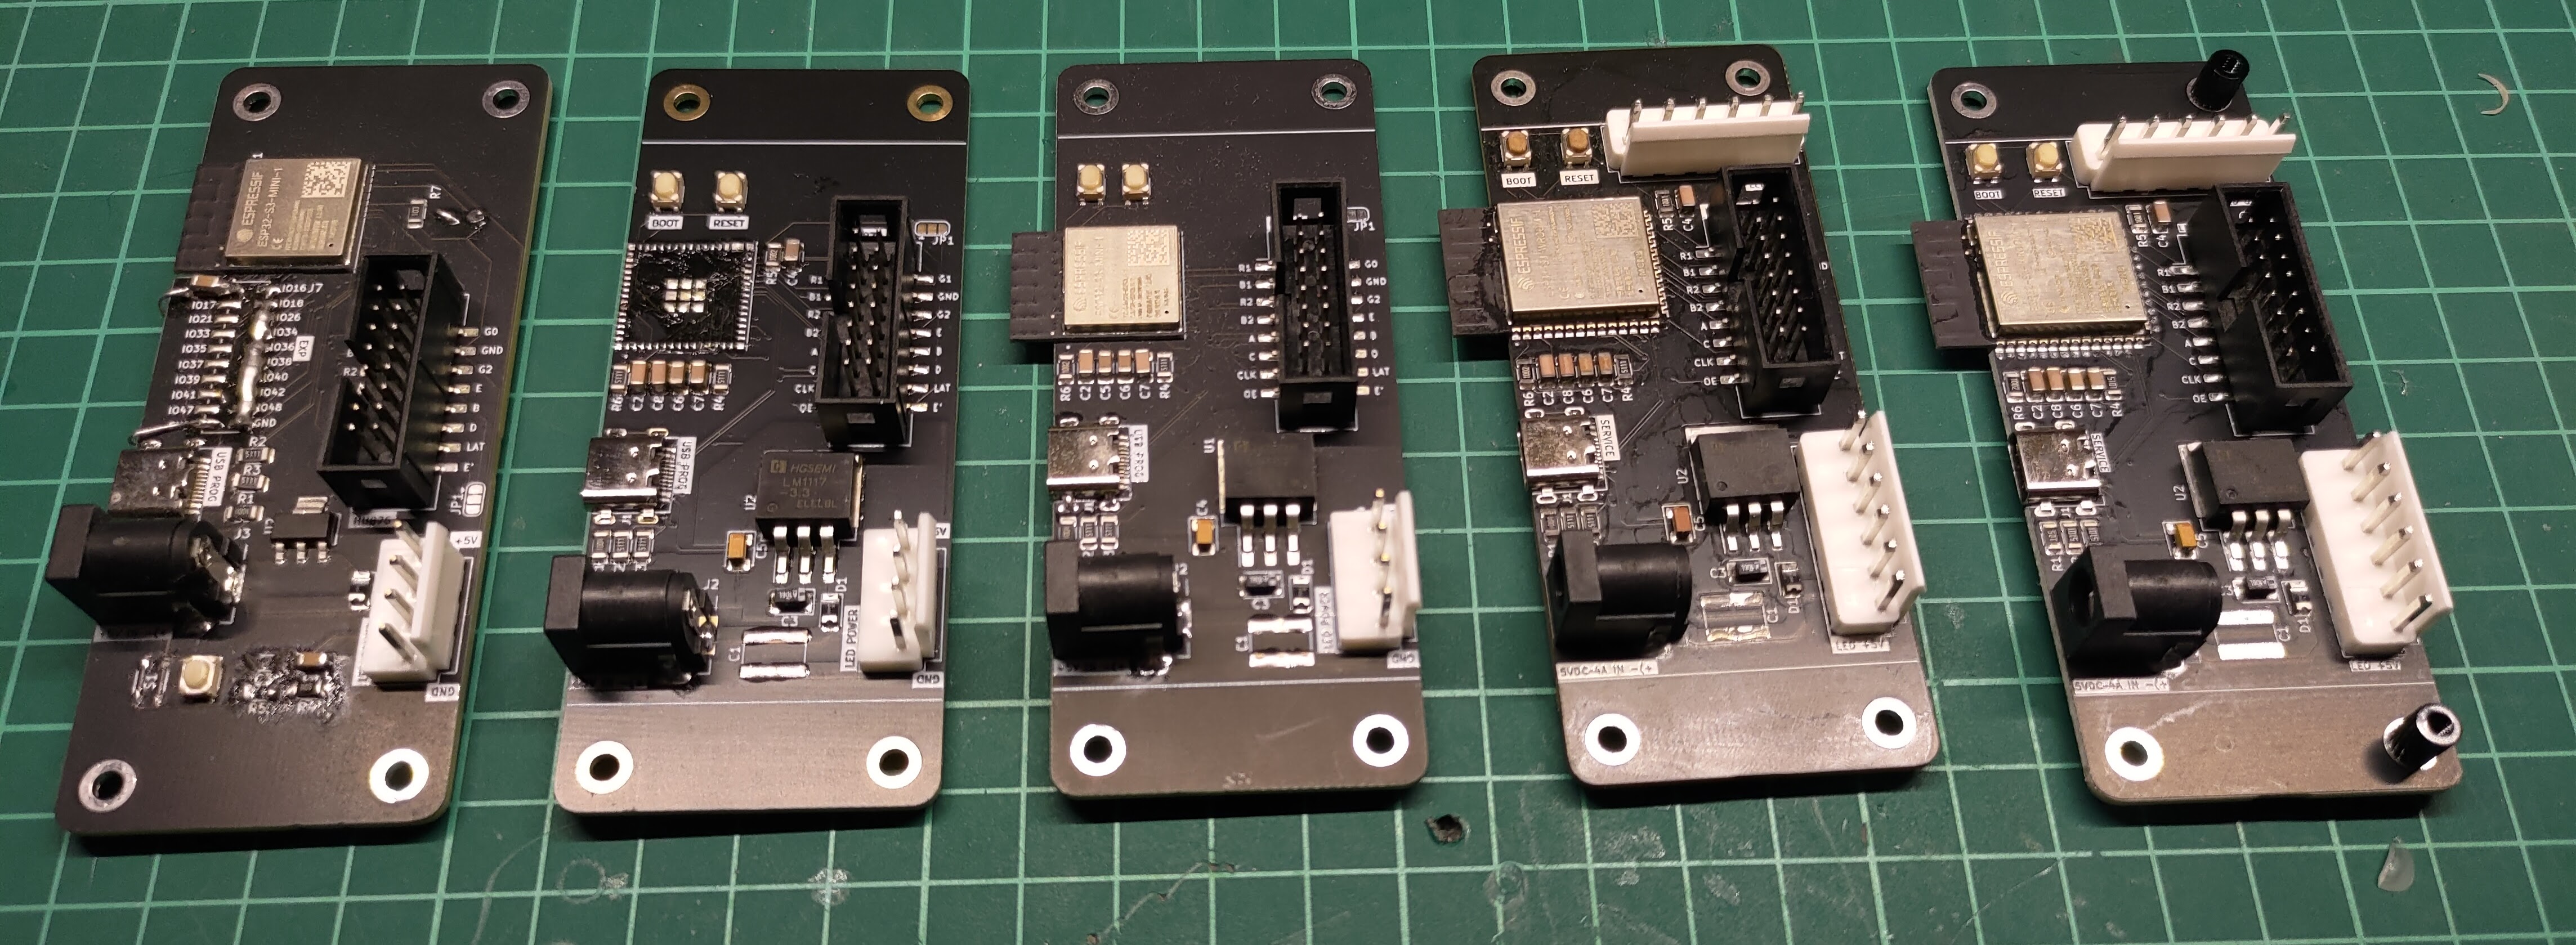 PCBs right to left, first version to the fully assembled version